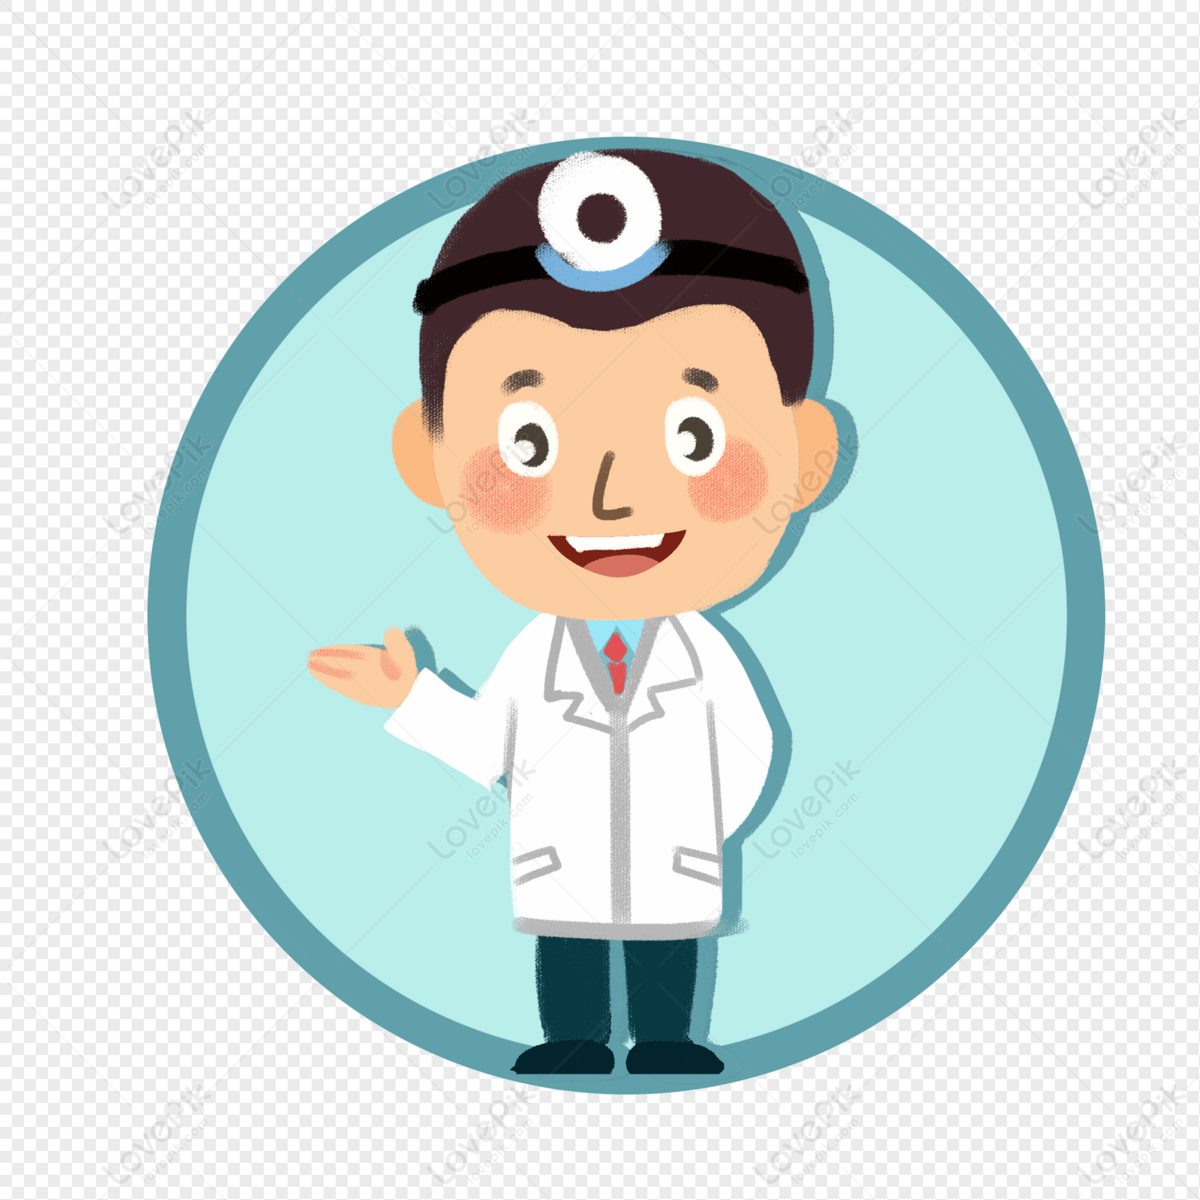 Dentist Cartoon Image PNG Image Free Download And Clipart Image For Free  Download - Lovepik | 401087861